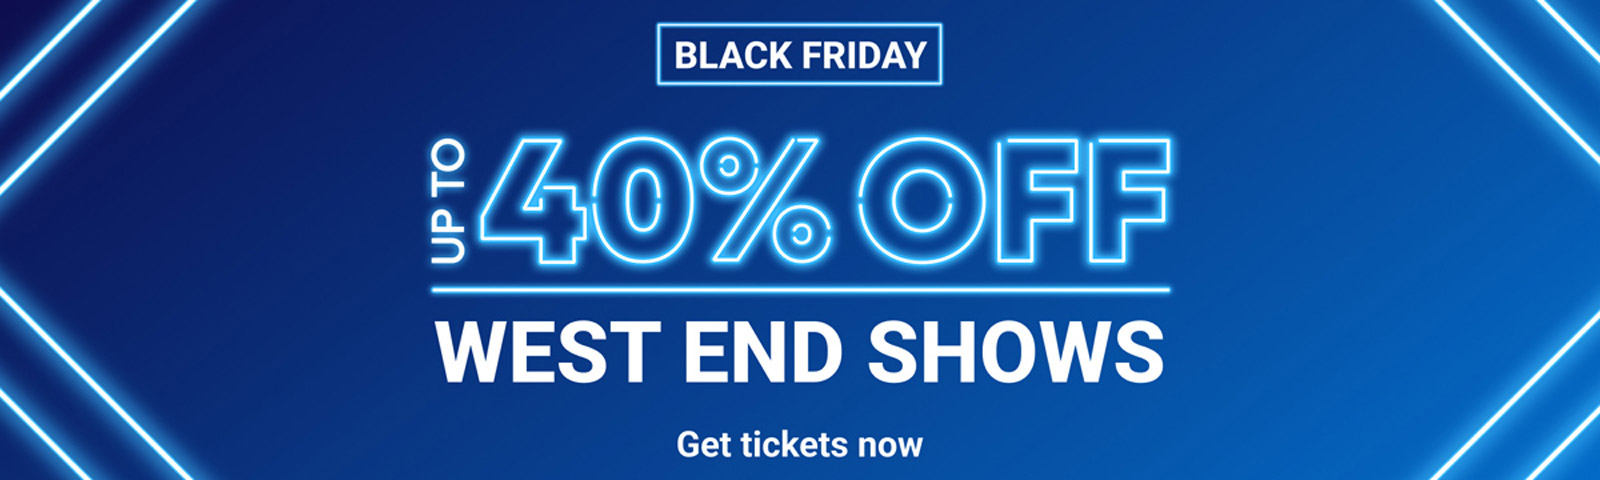 west-end-theatre-tickets-black-friday